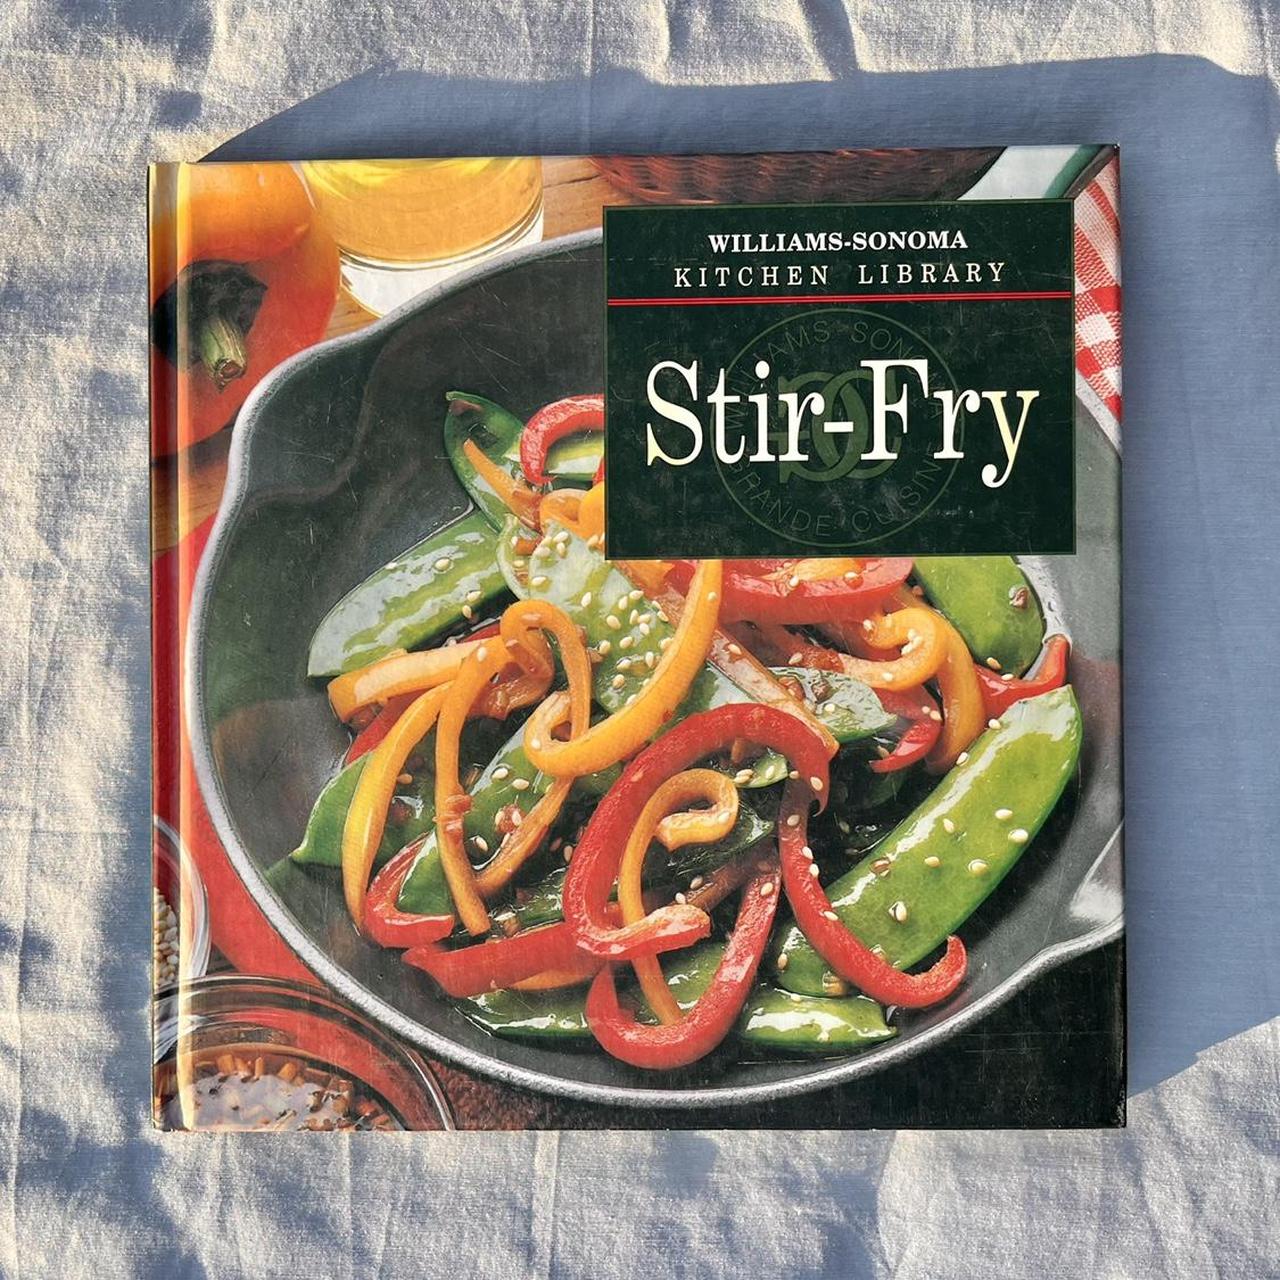 Product Image 1 - Williams-Sonoma Kitchen Library: Stir-Fry book.